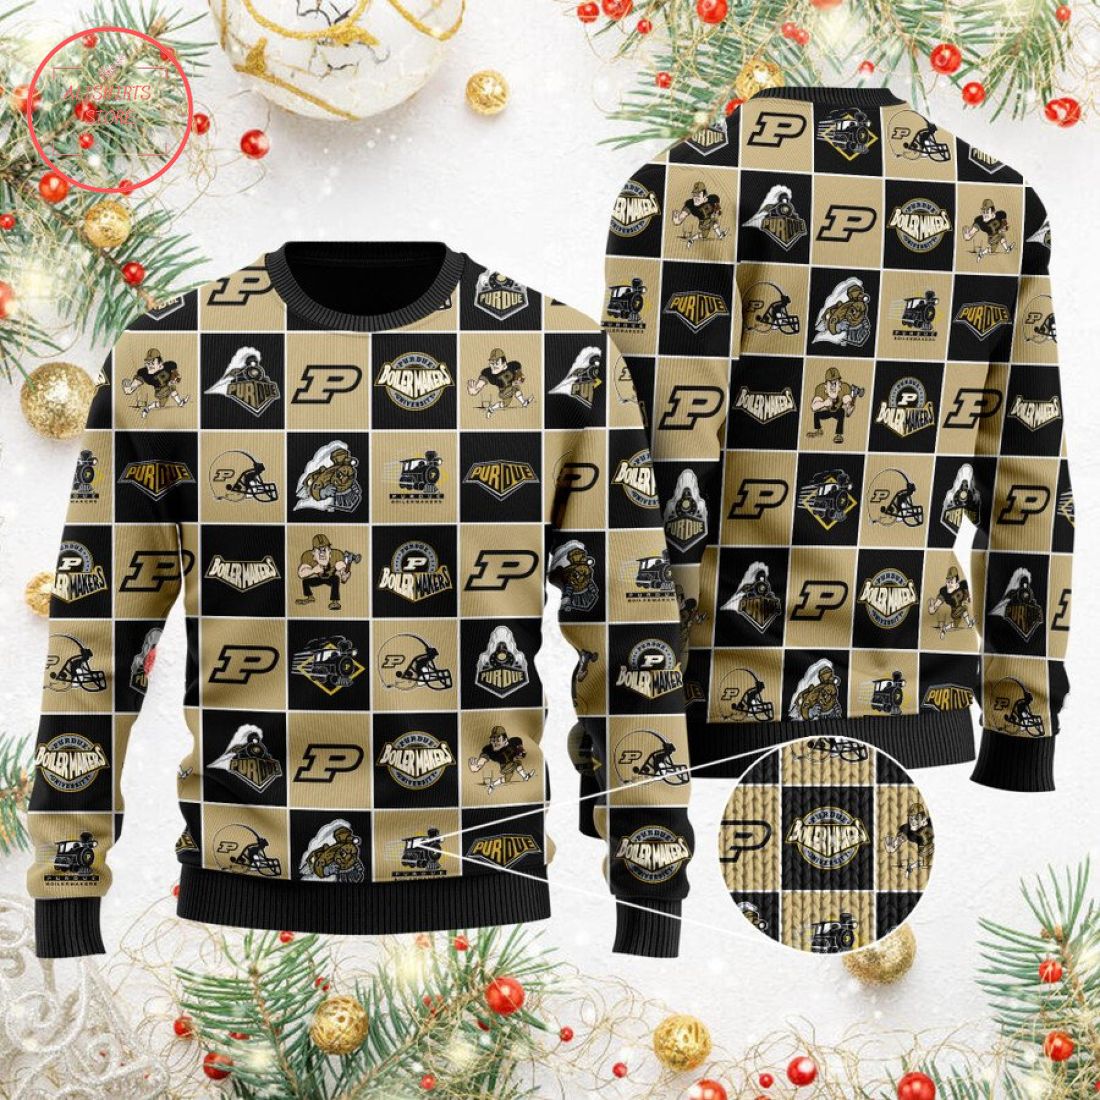 Purdue Boilermakers Football Team Logo Ugly Christmas Sweater